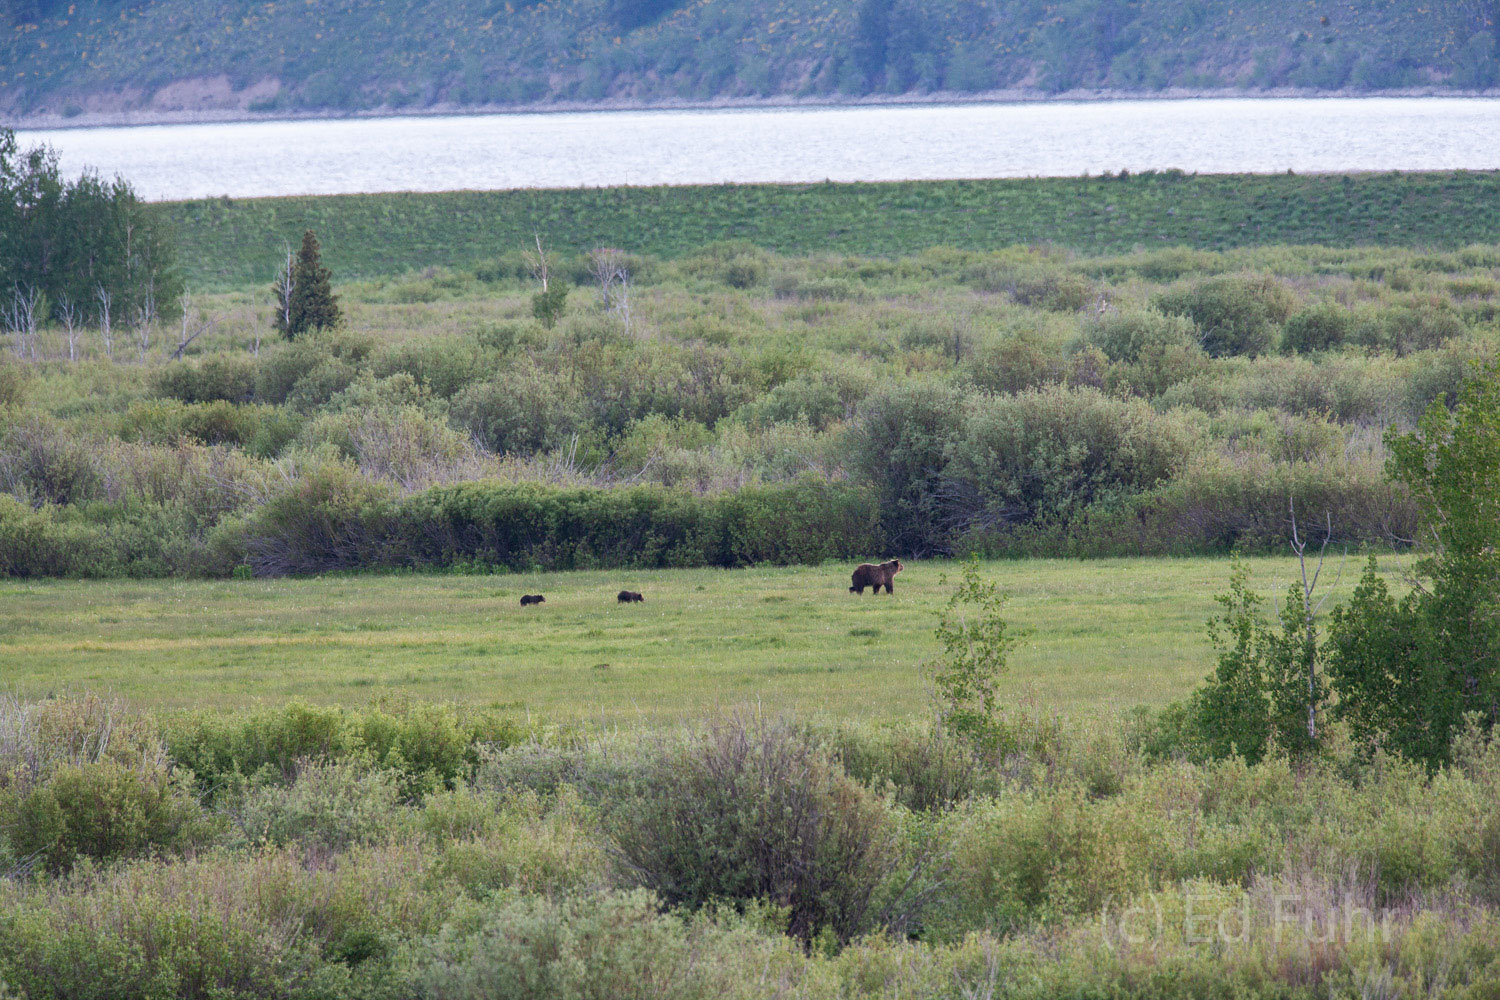 Grizzly 610 stalks elk in an open meadow near Willow Flats.  Not only are her two cubs anxious for success, but just out of view...